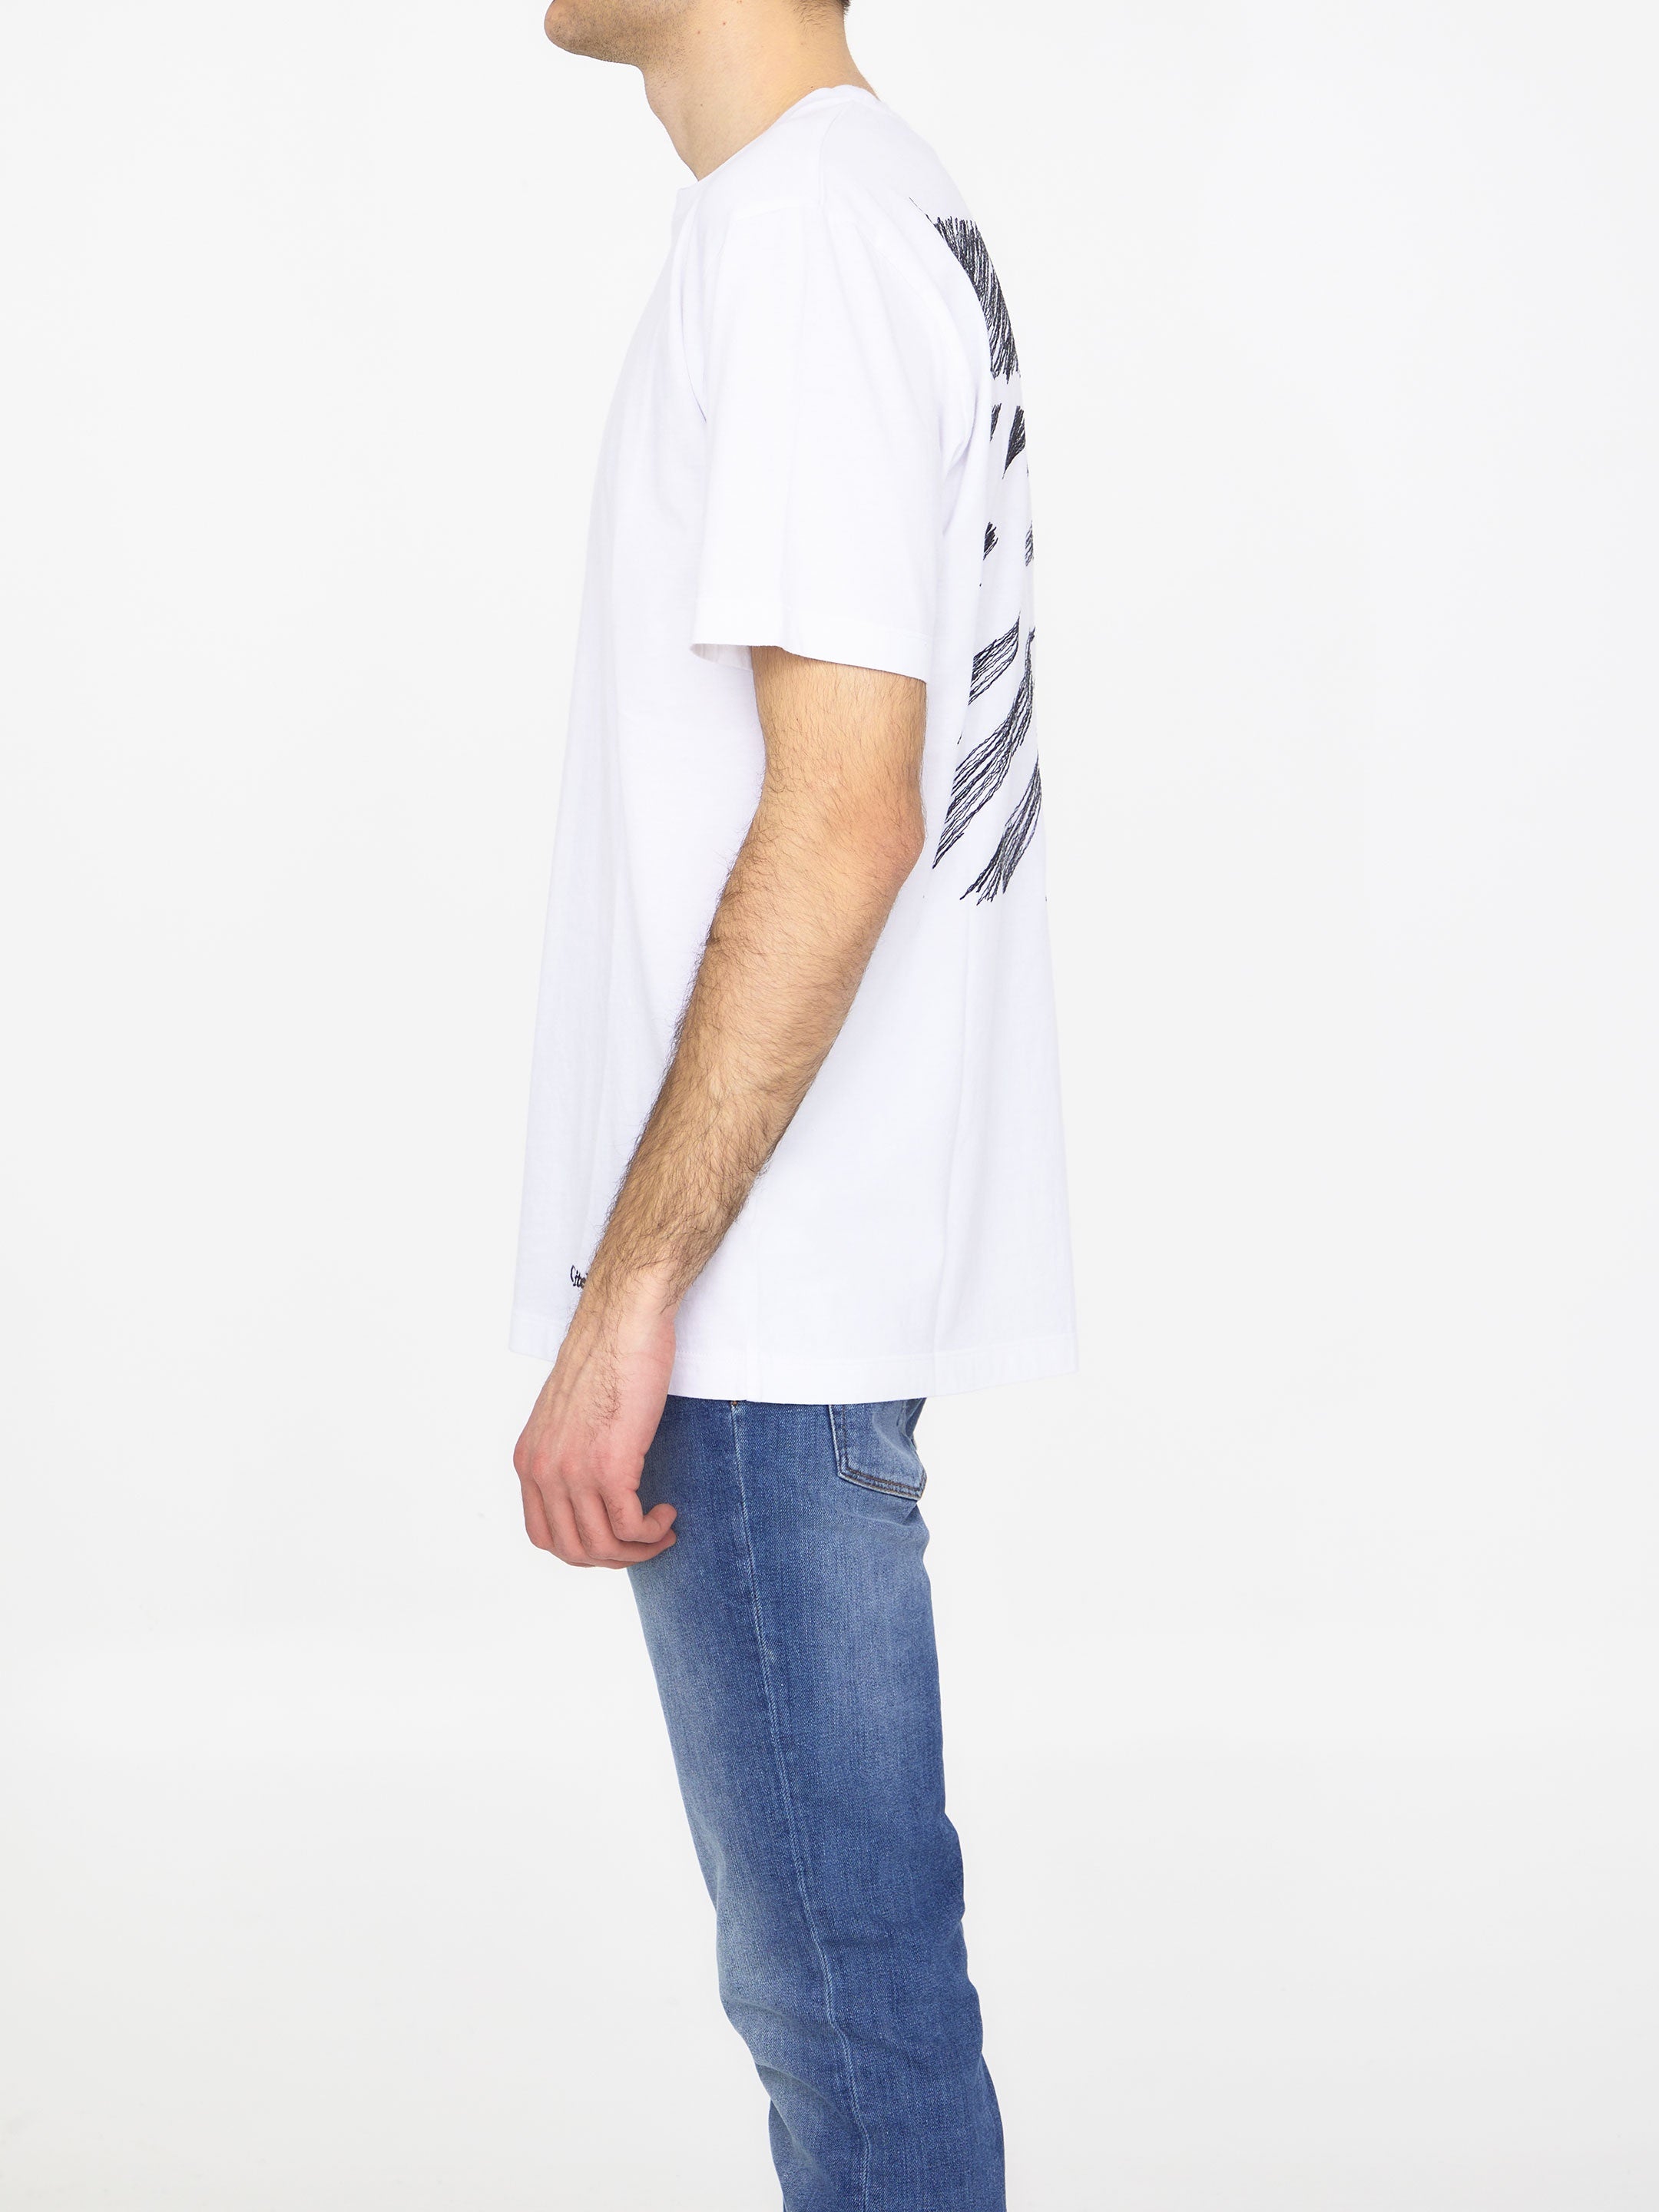 OFF-WHITE-OUTLET-SALE-Scribble-Diagonal-t-shirt-Shirts-S-WHITE-ARCHIVE-COLLECTION-3.jpg